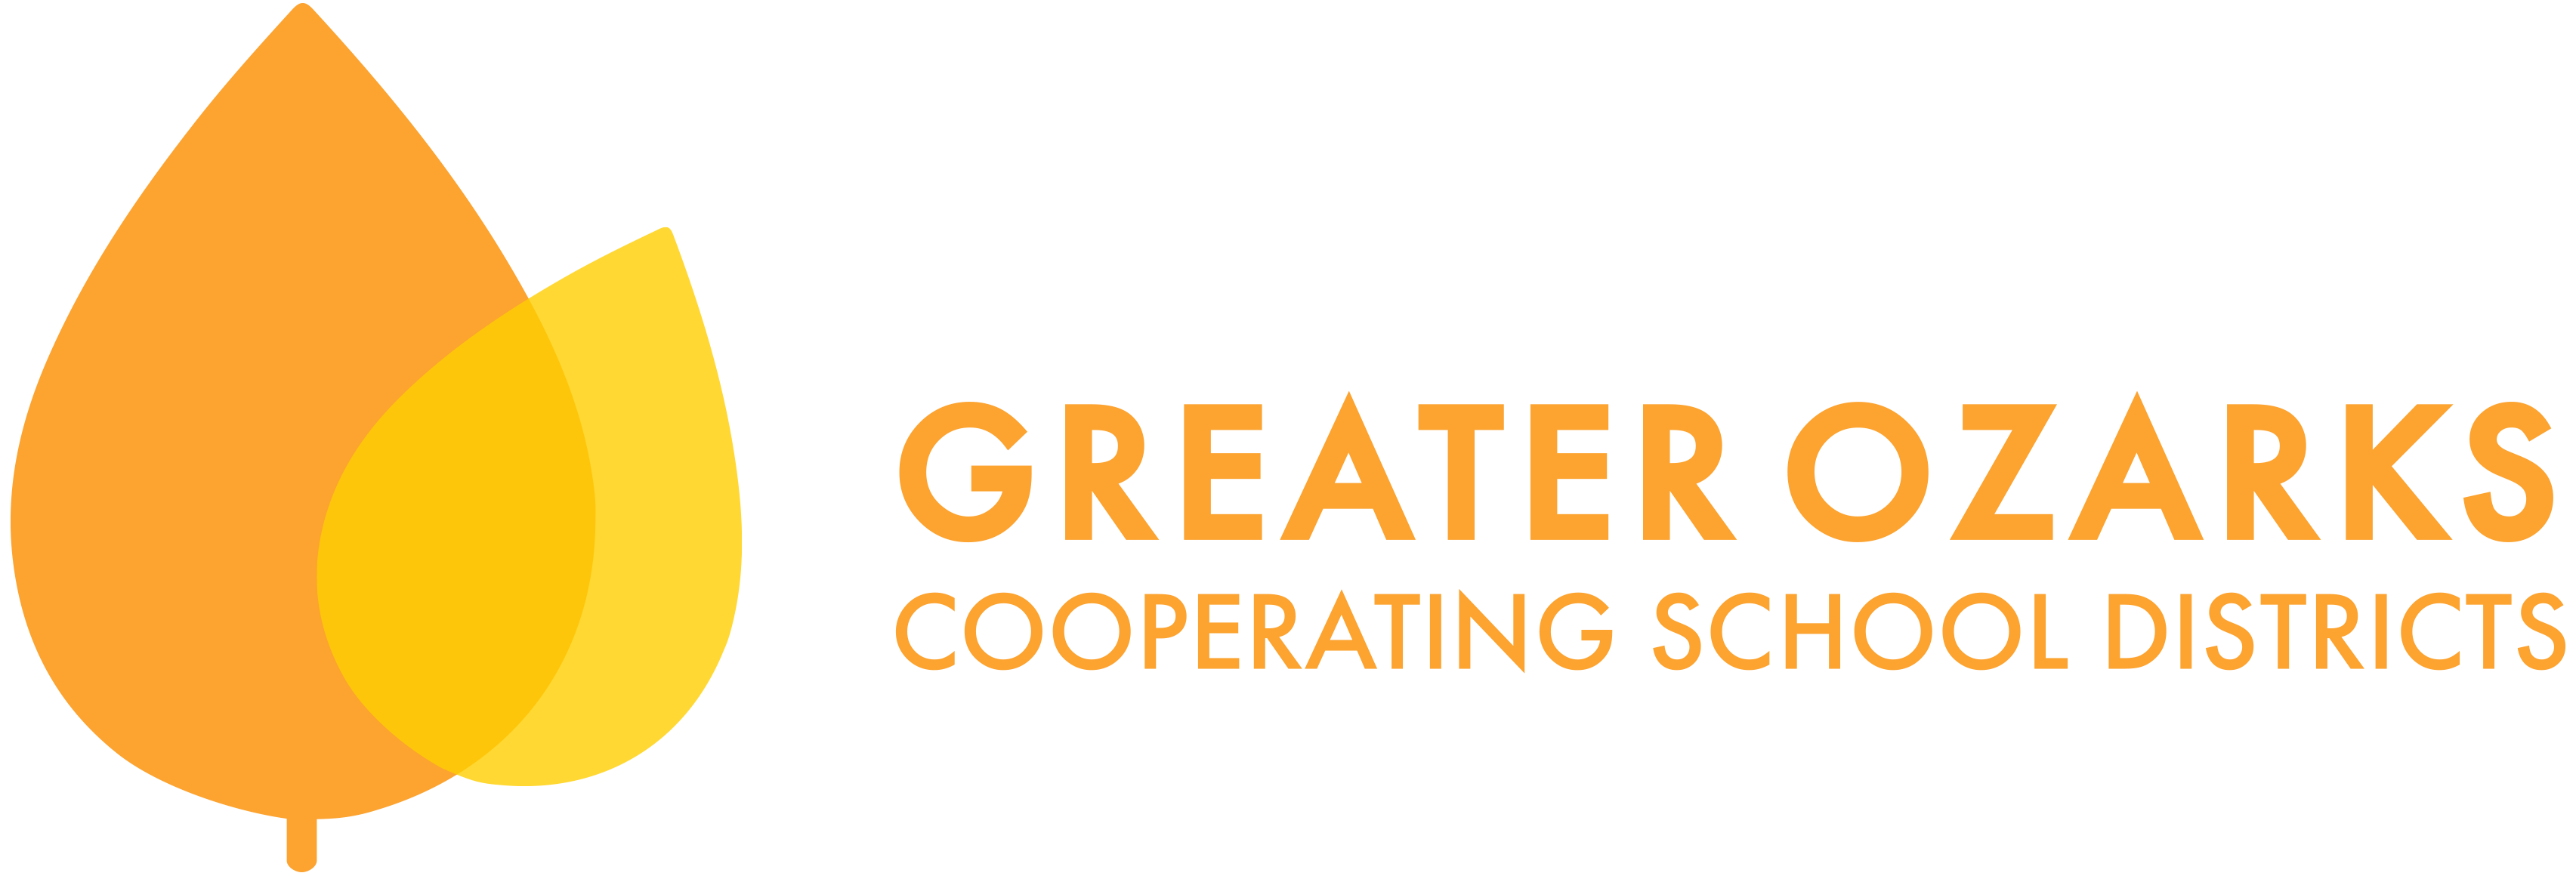 Greater Ozarks Cooperating School Districts